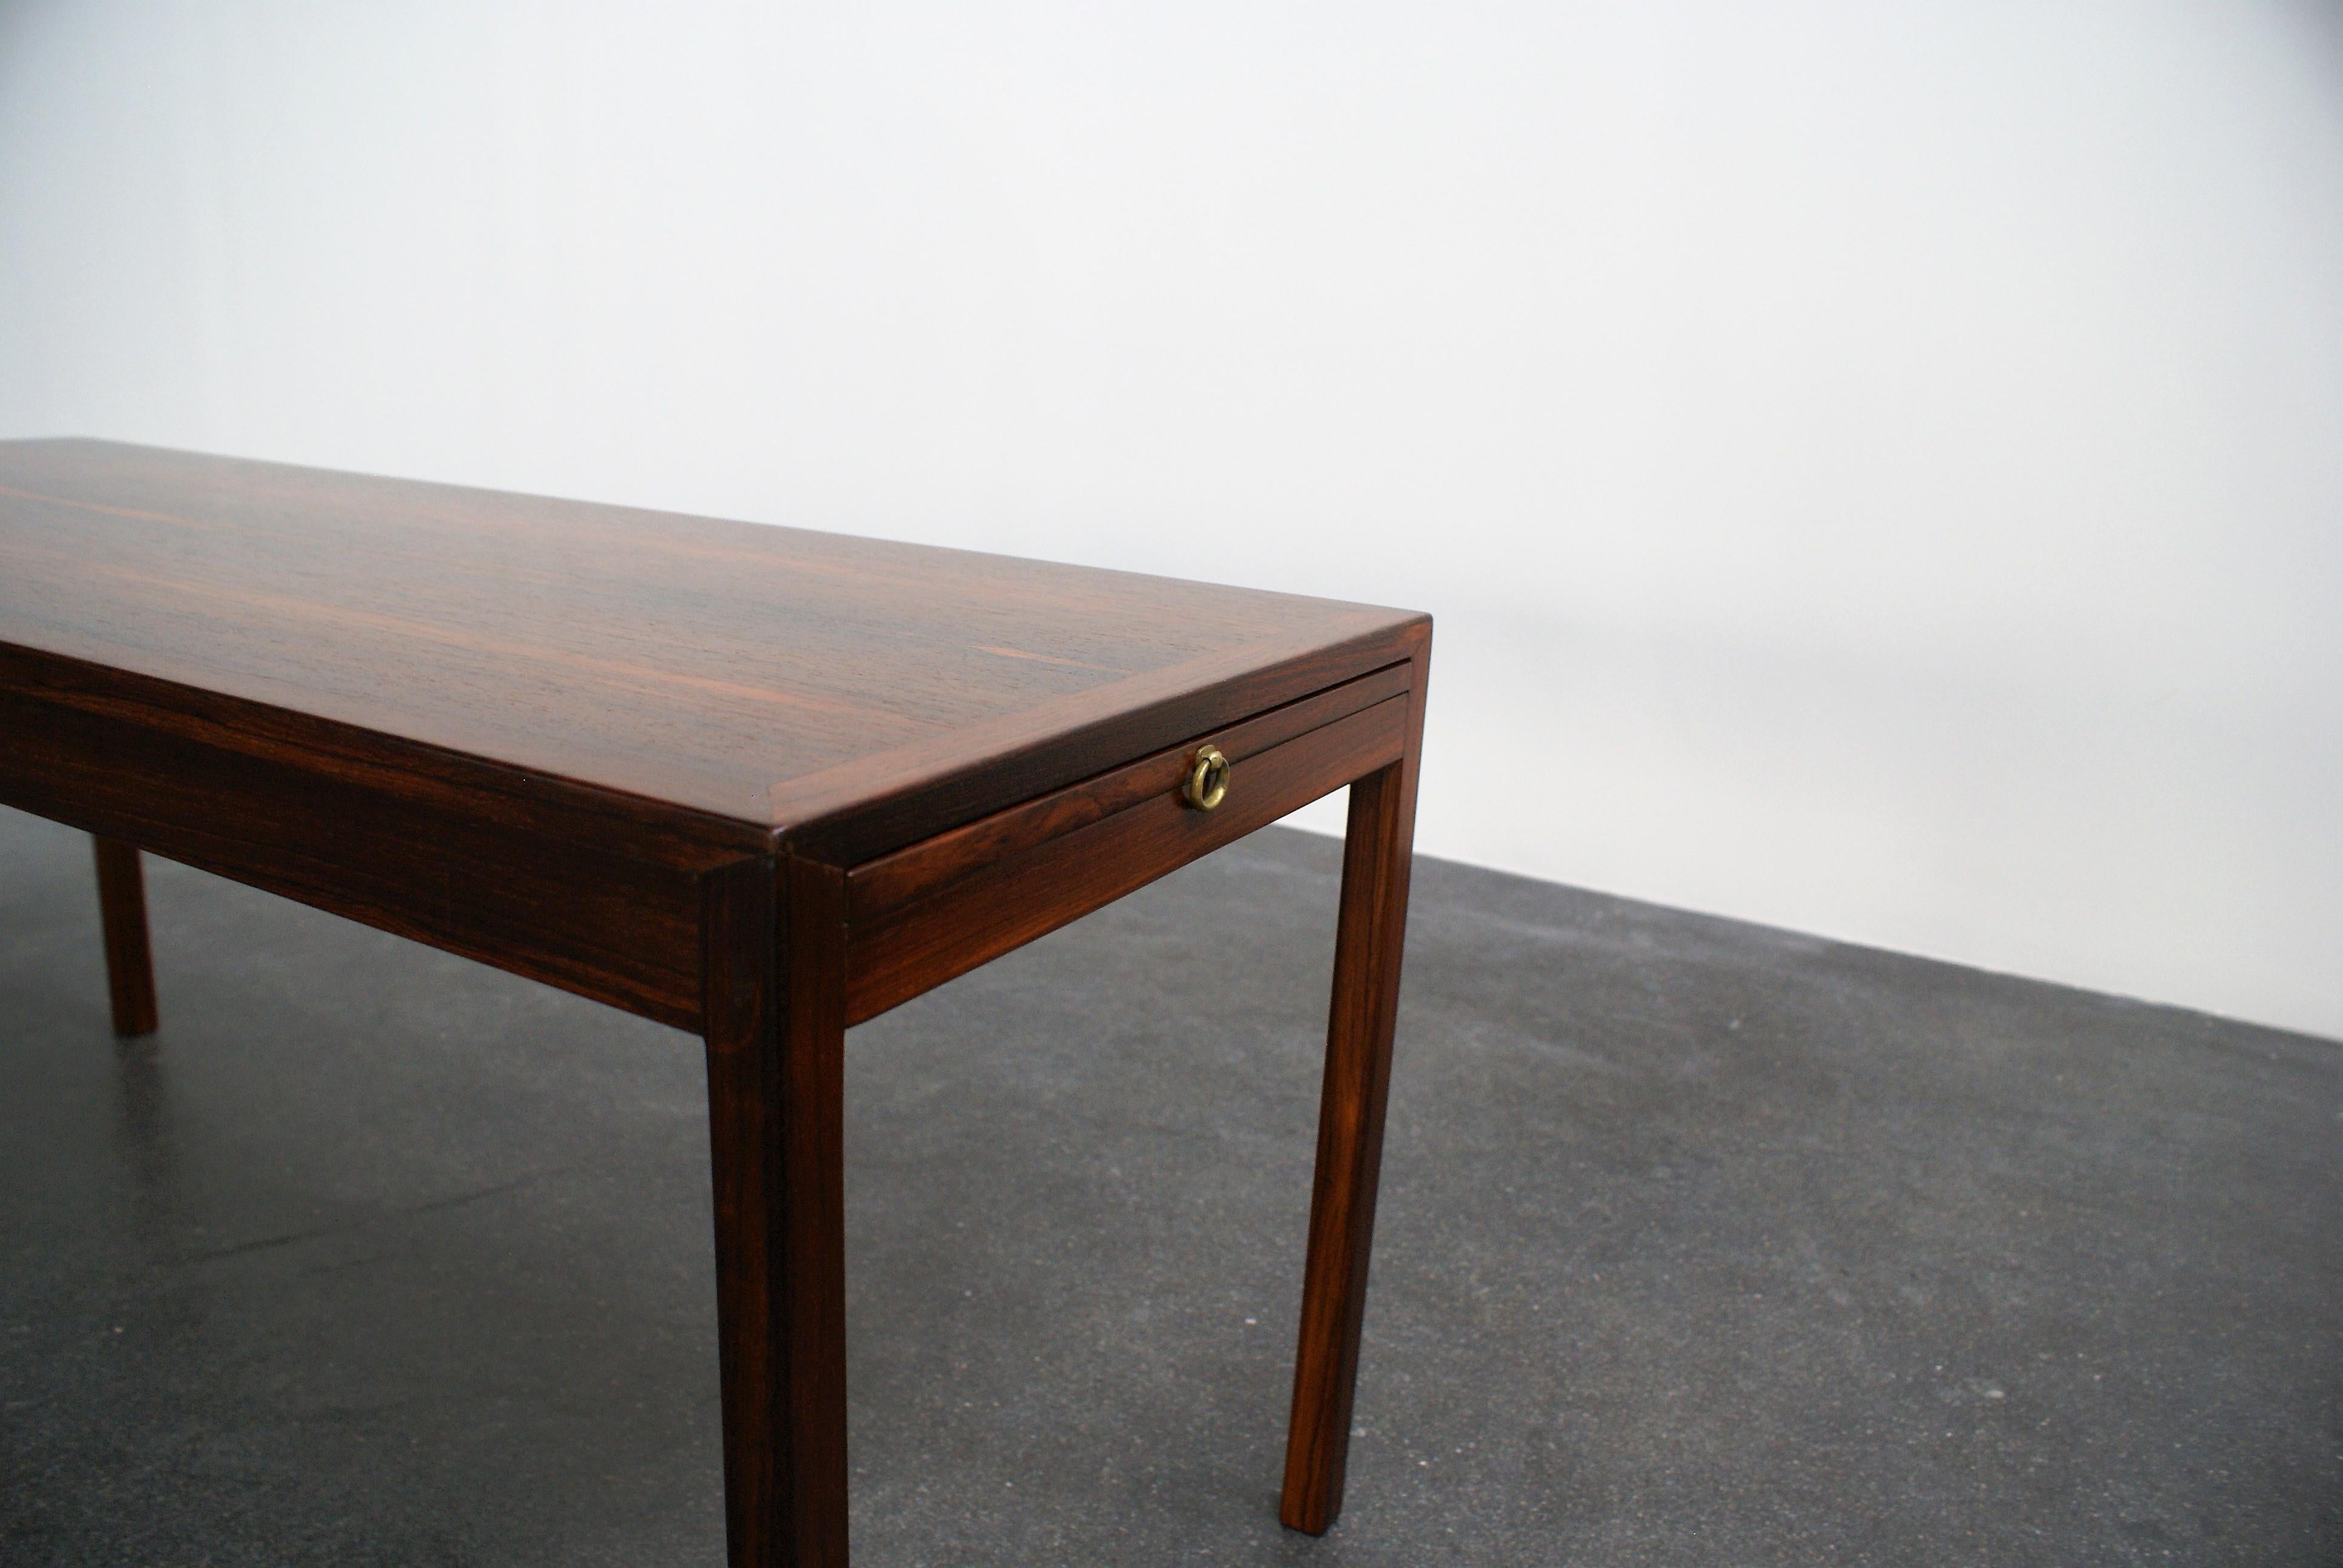 Ole Wanscher Extendable Low Table in Brazilian Rosewood for A. J. Iversen, 1950s For Sale 2